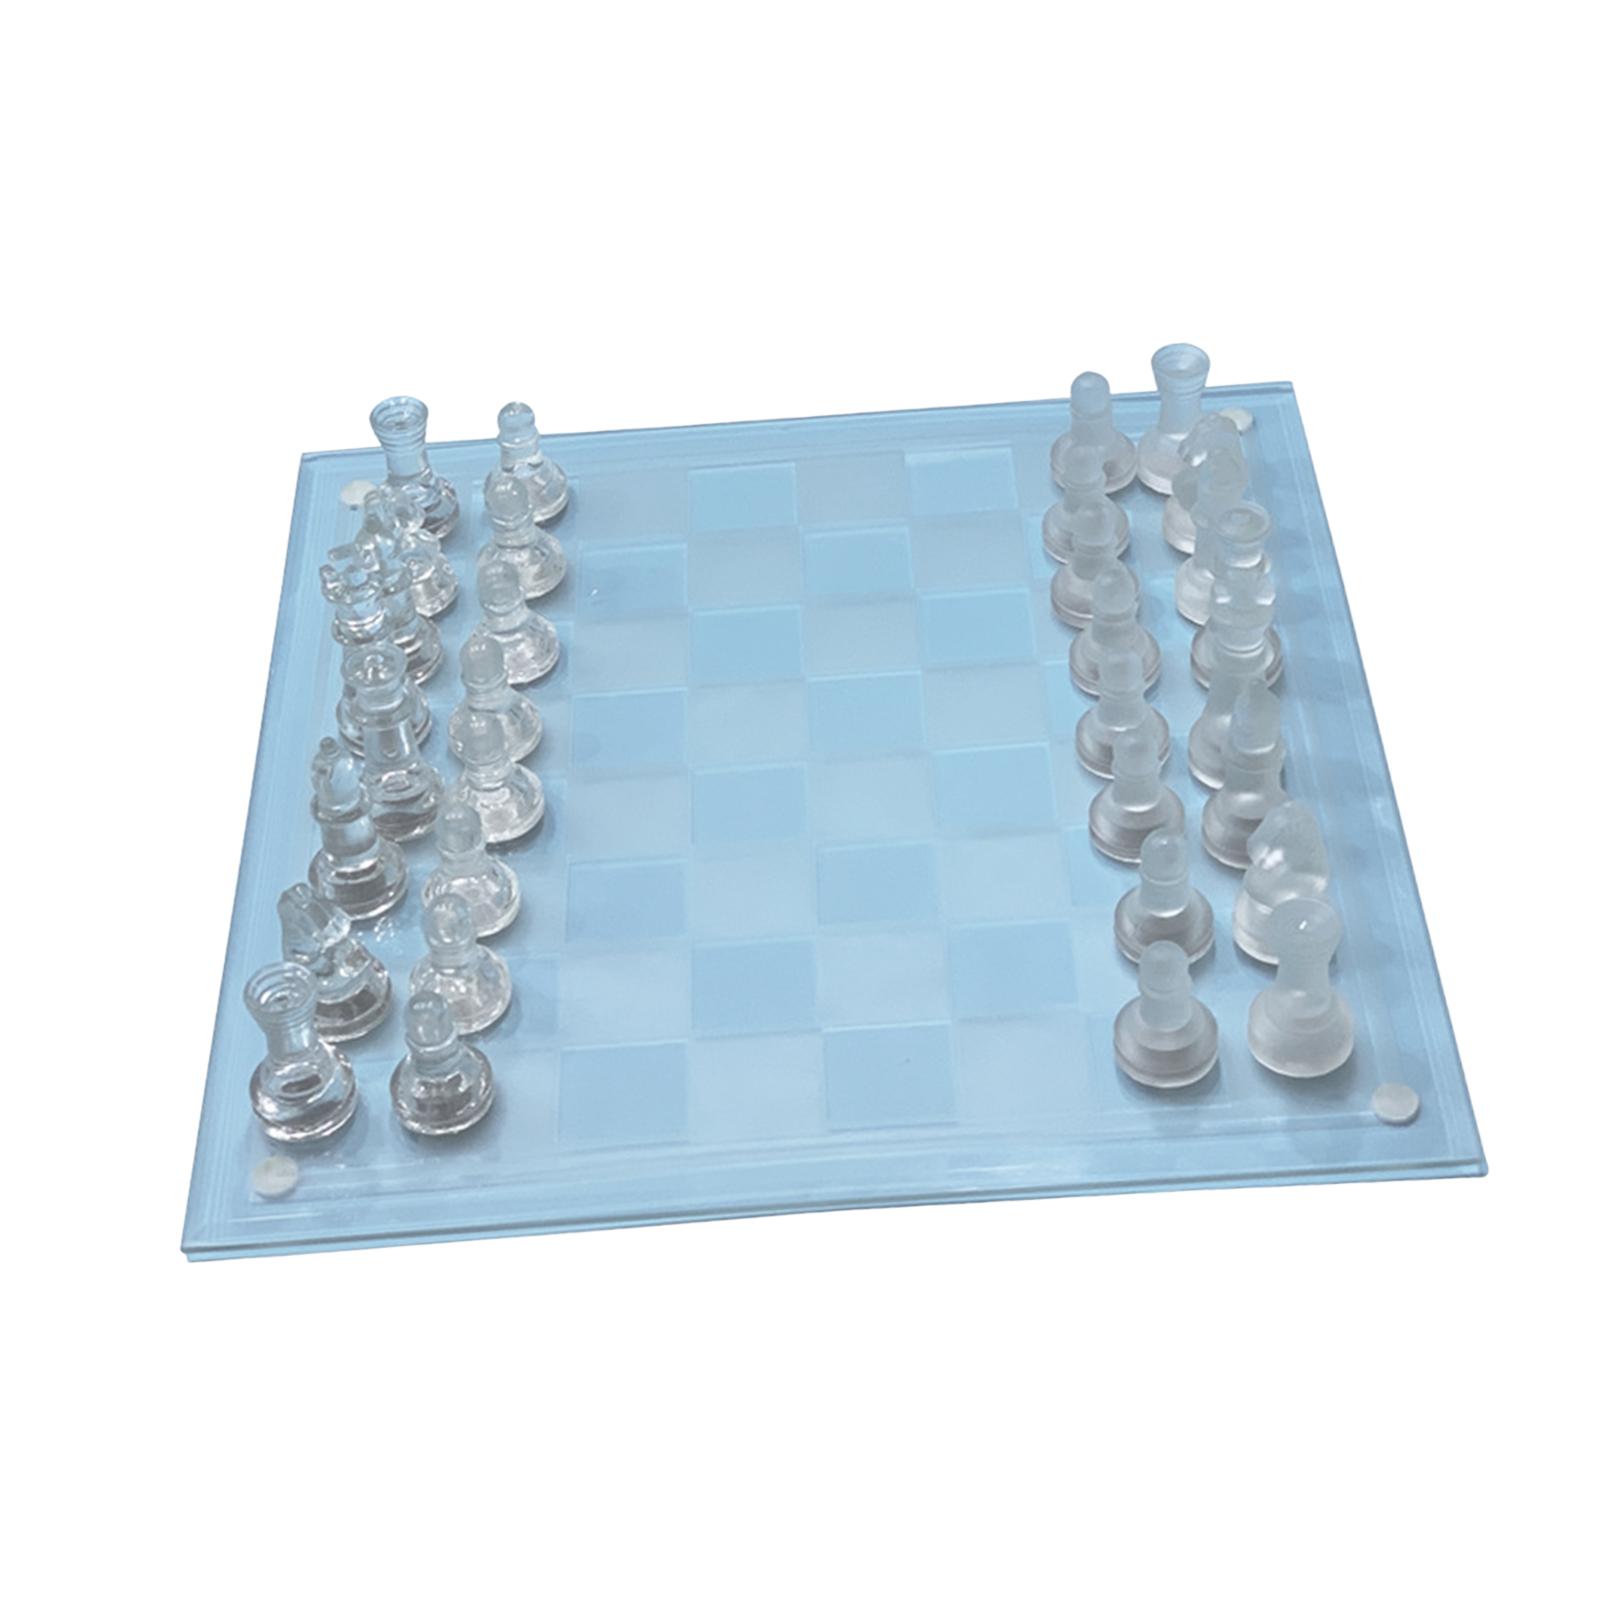 Glass Chess Game, Crystal Chess Board, Adults Play Set, Frosted Chess Board Set, Classic Strategy Game for Party, Interaction Activity Festival - image 5 of 8